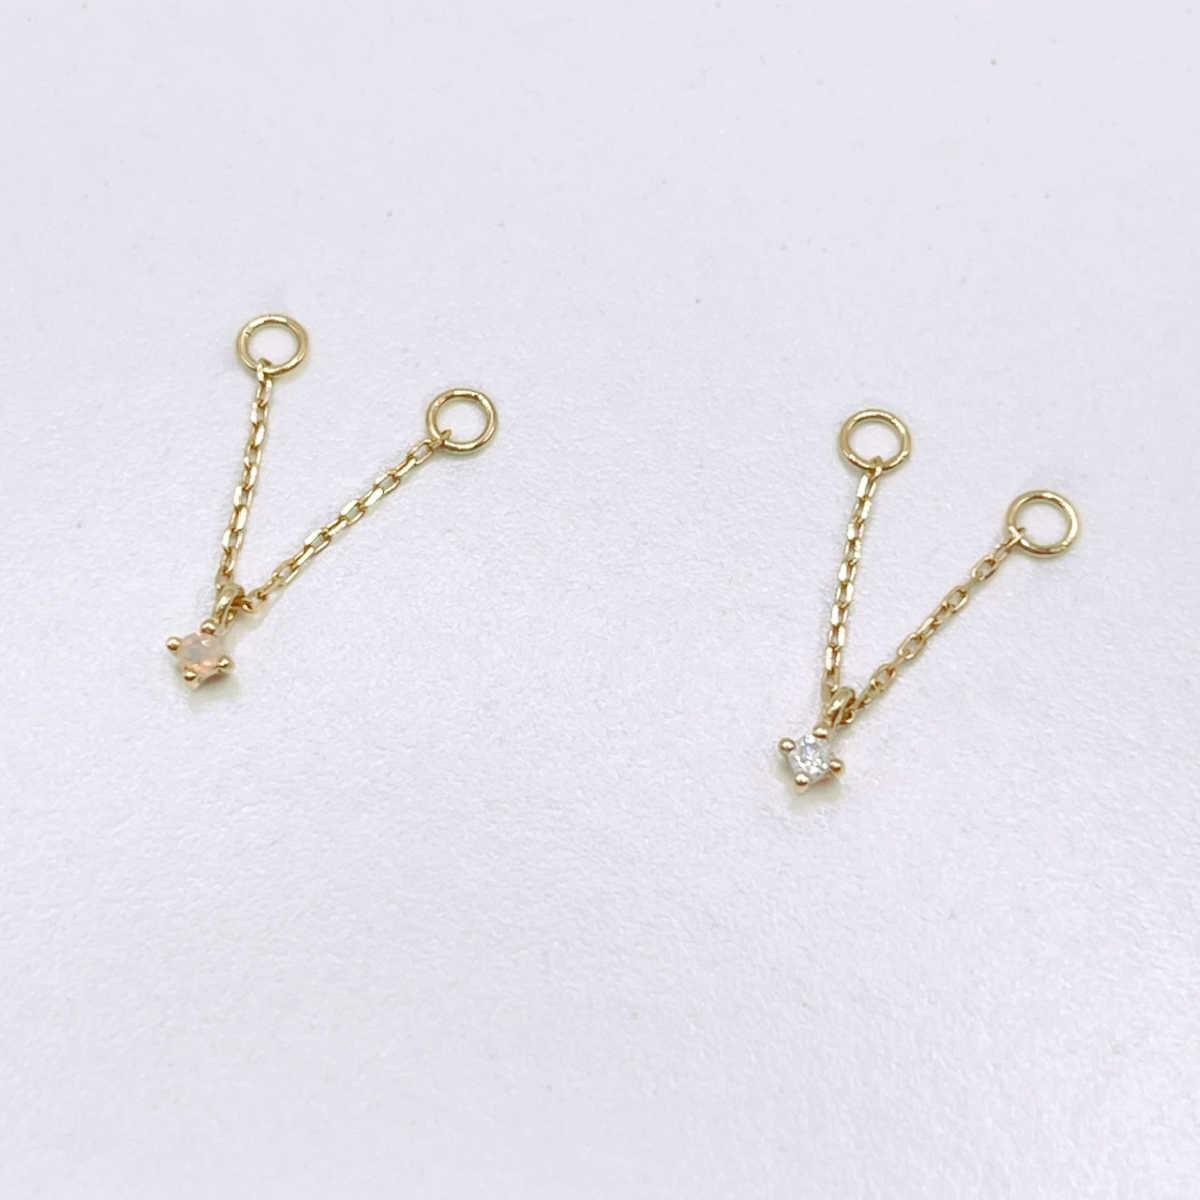 2x Earring/Multi Strand Necklace Connector Charm 5 Hole Chandelier